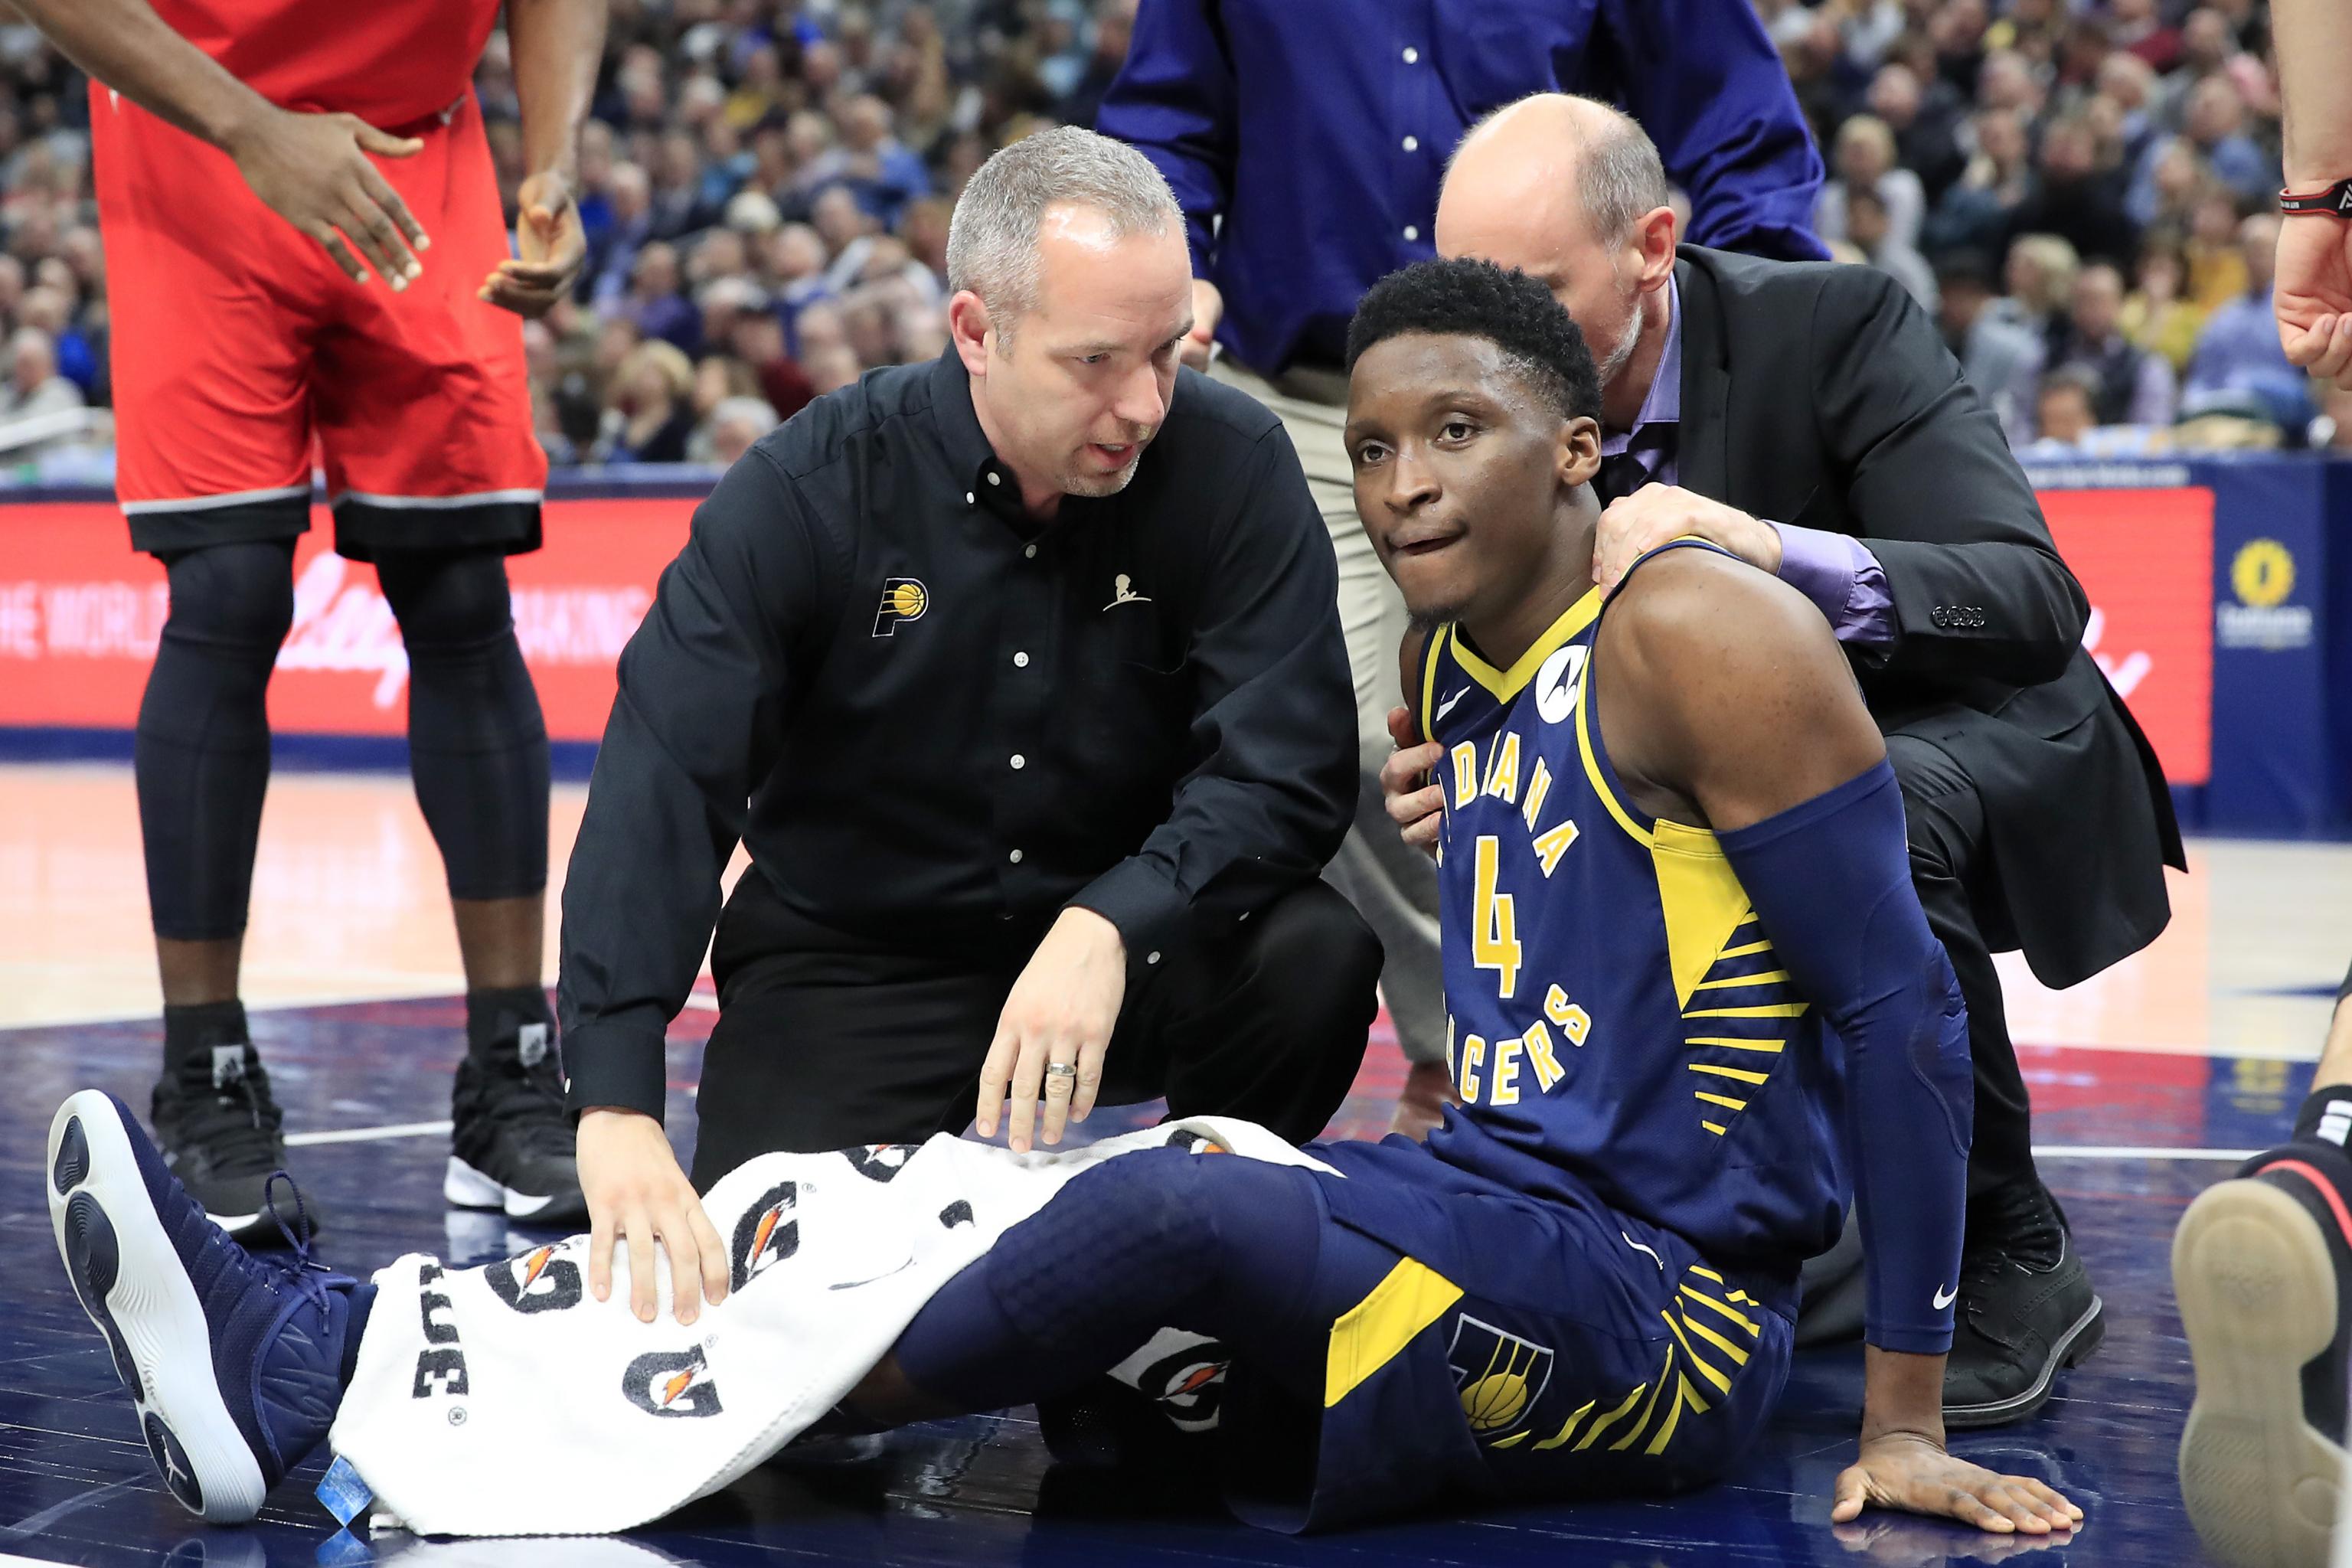 Rockets guard Victor Oladipo suffered injury setback in practice